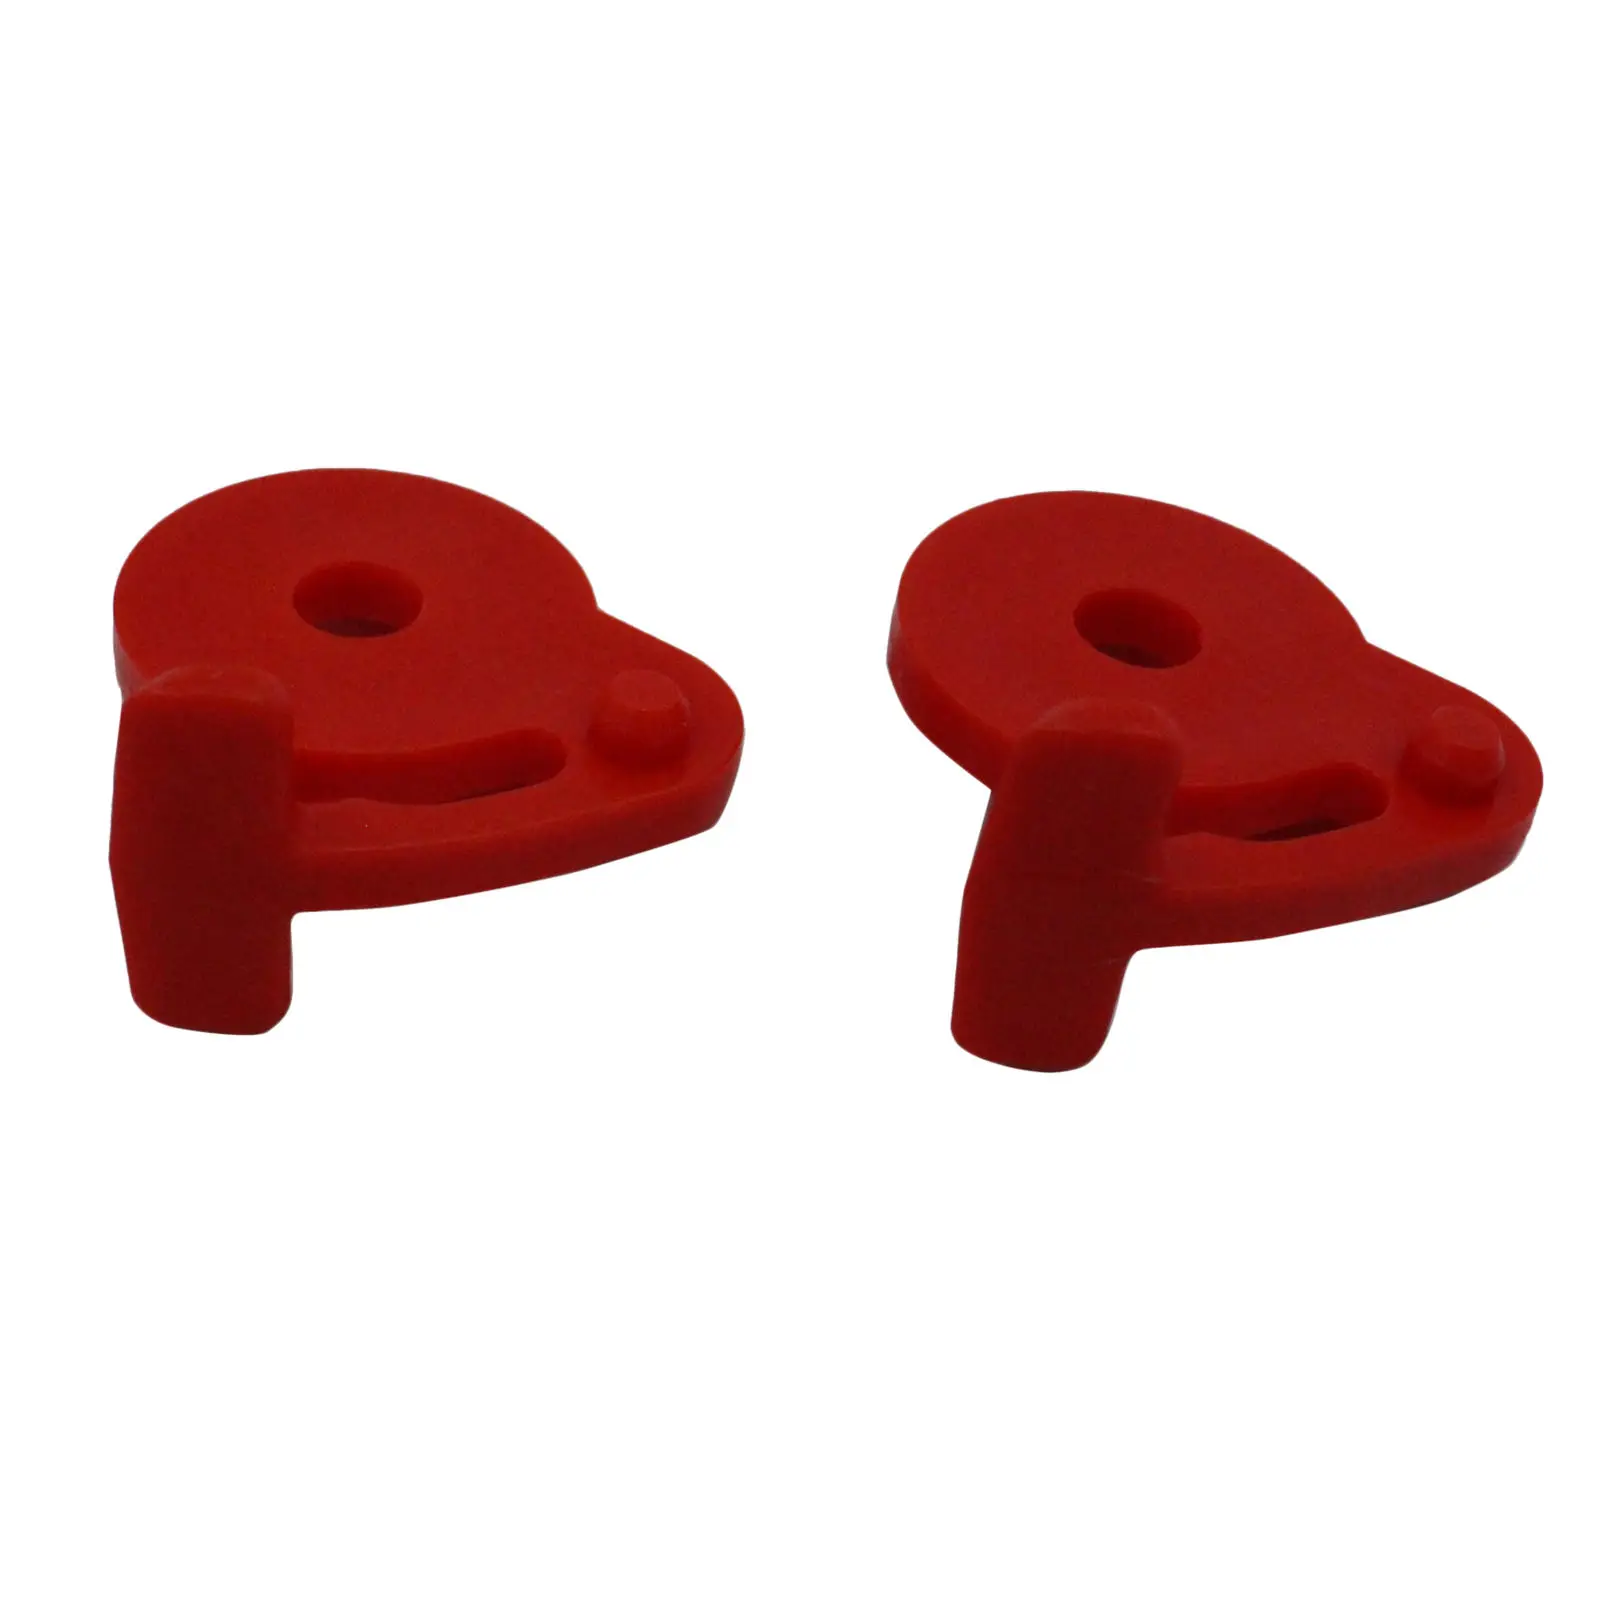 1 Pair Fuses Red Locks for Side Wall Lock Basic Replacement Spare Part